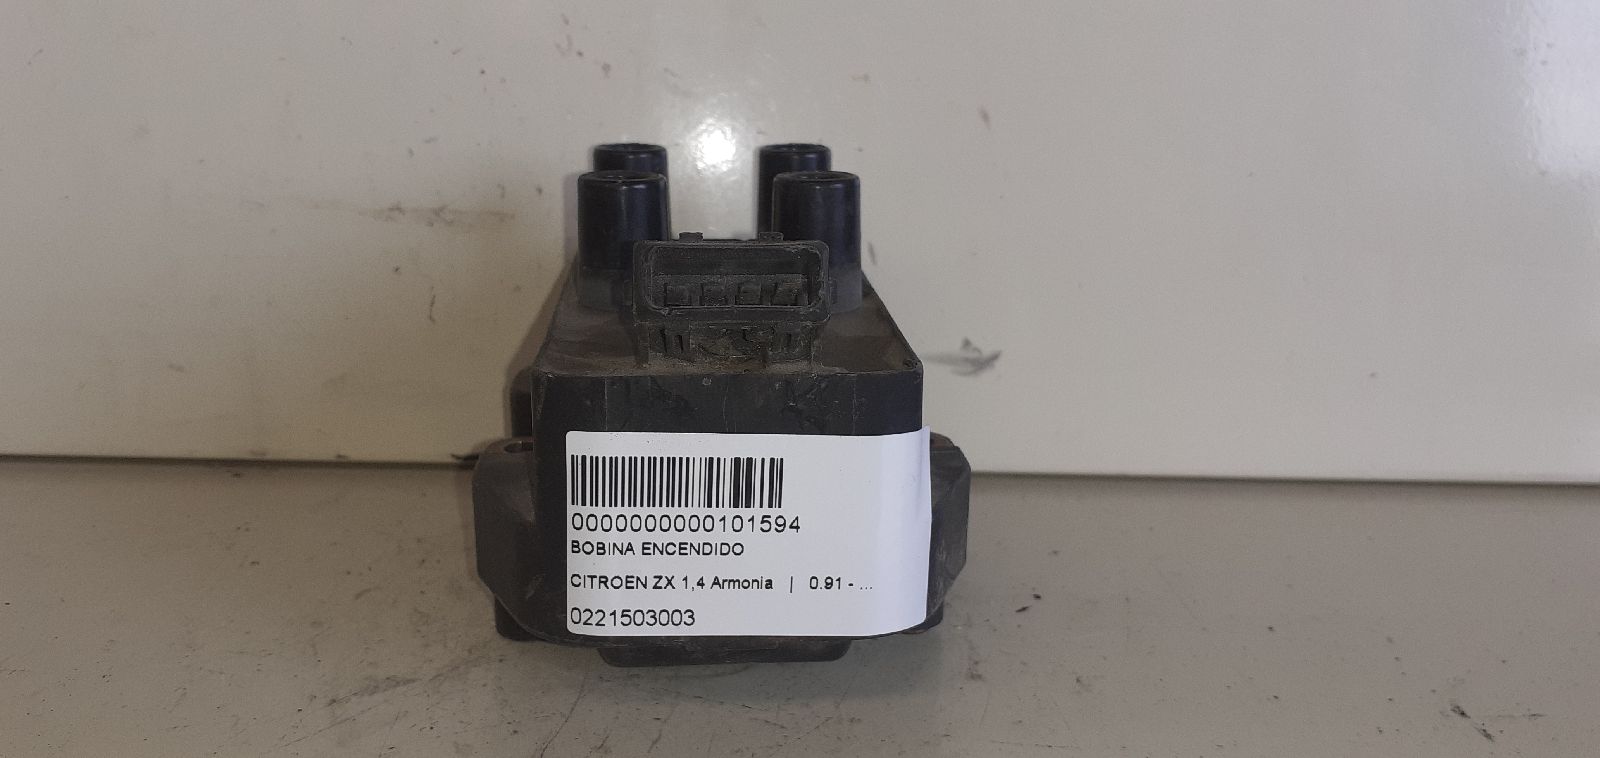 RENAULT ZX 1 generation (1991-1997) High Voltage Ignition Coil 0221503003 25280988